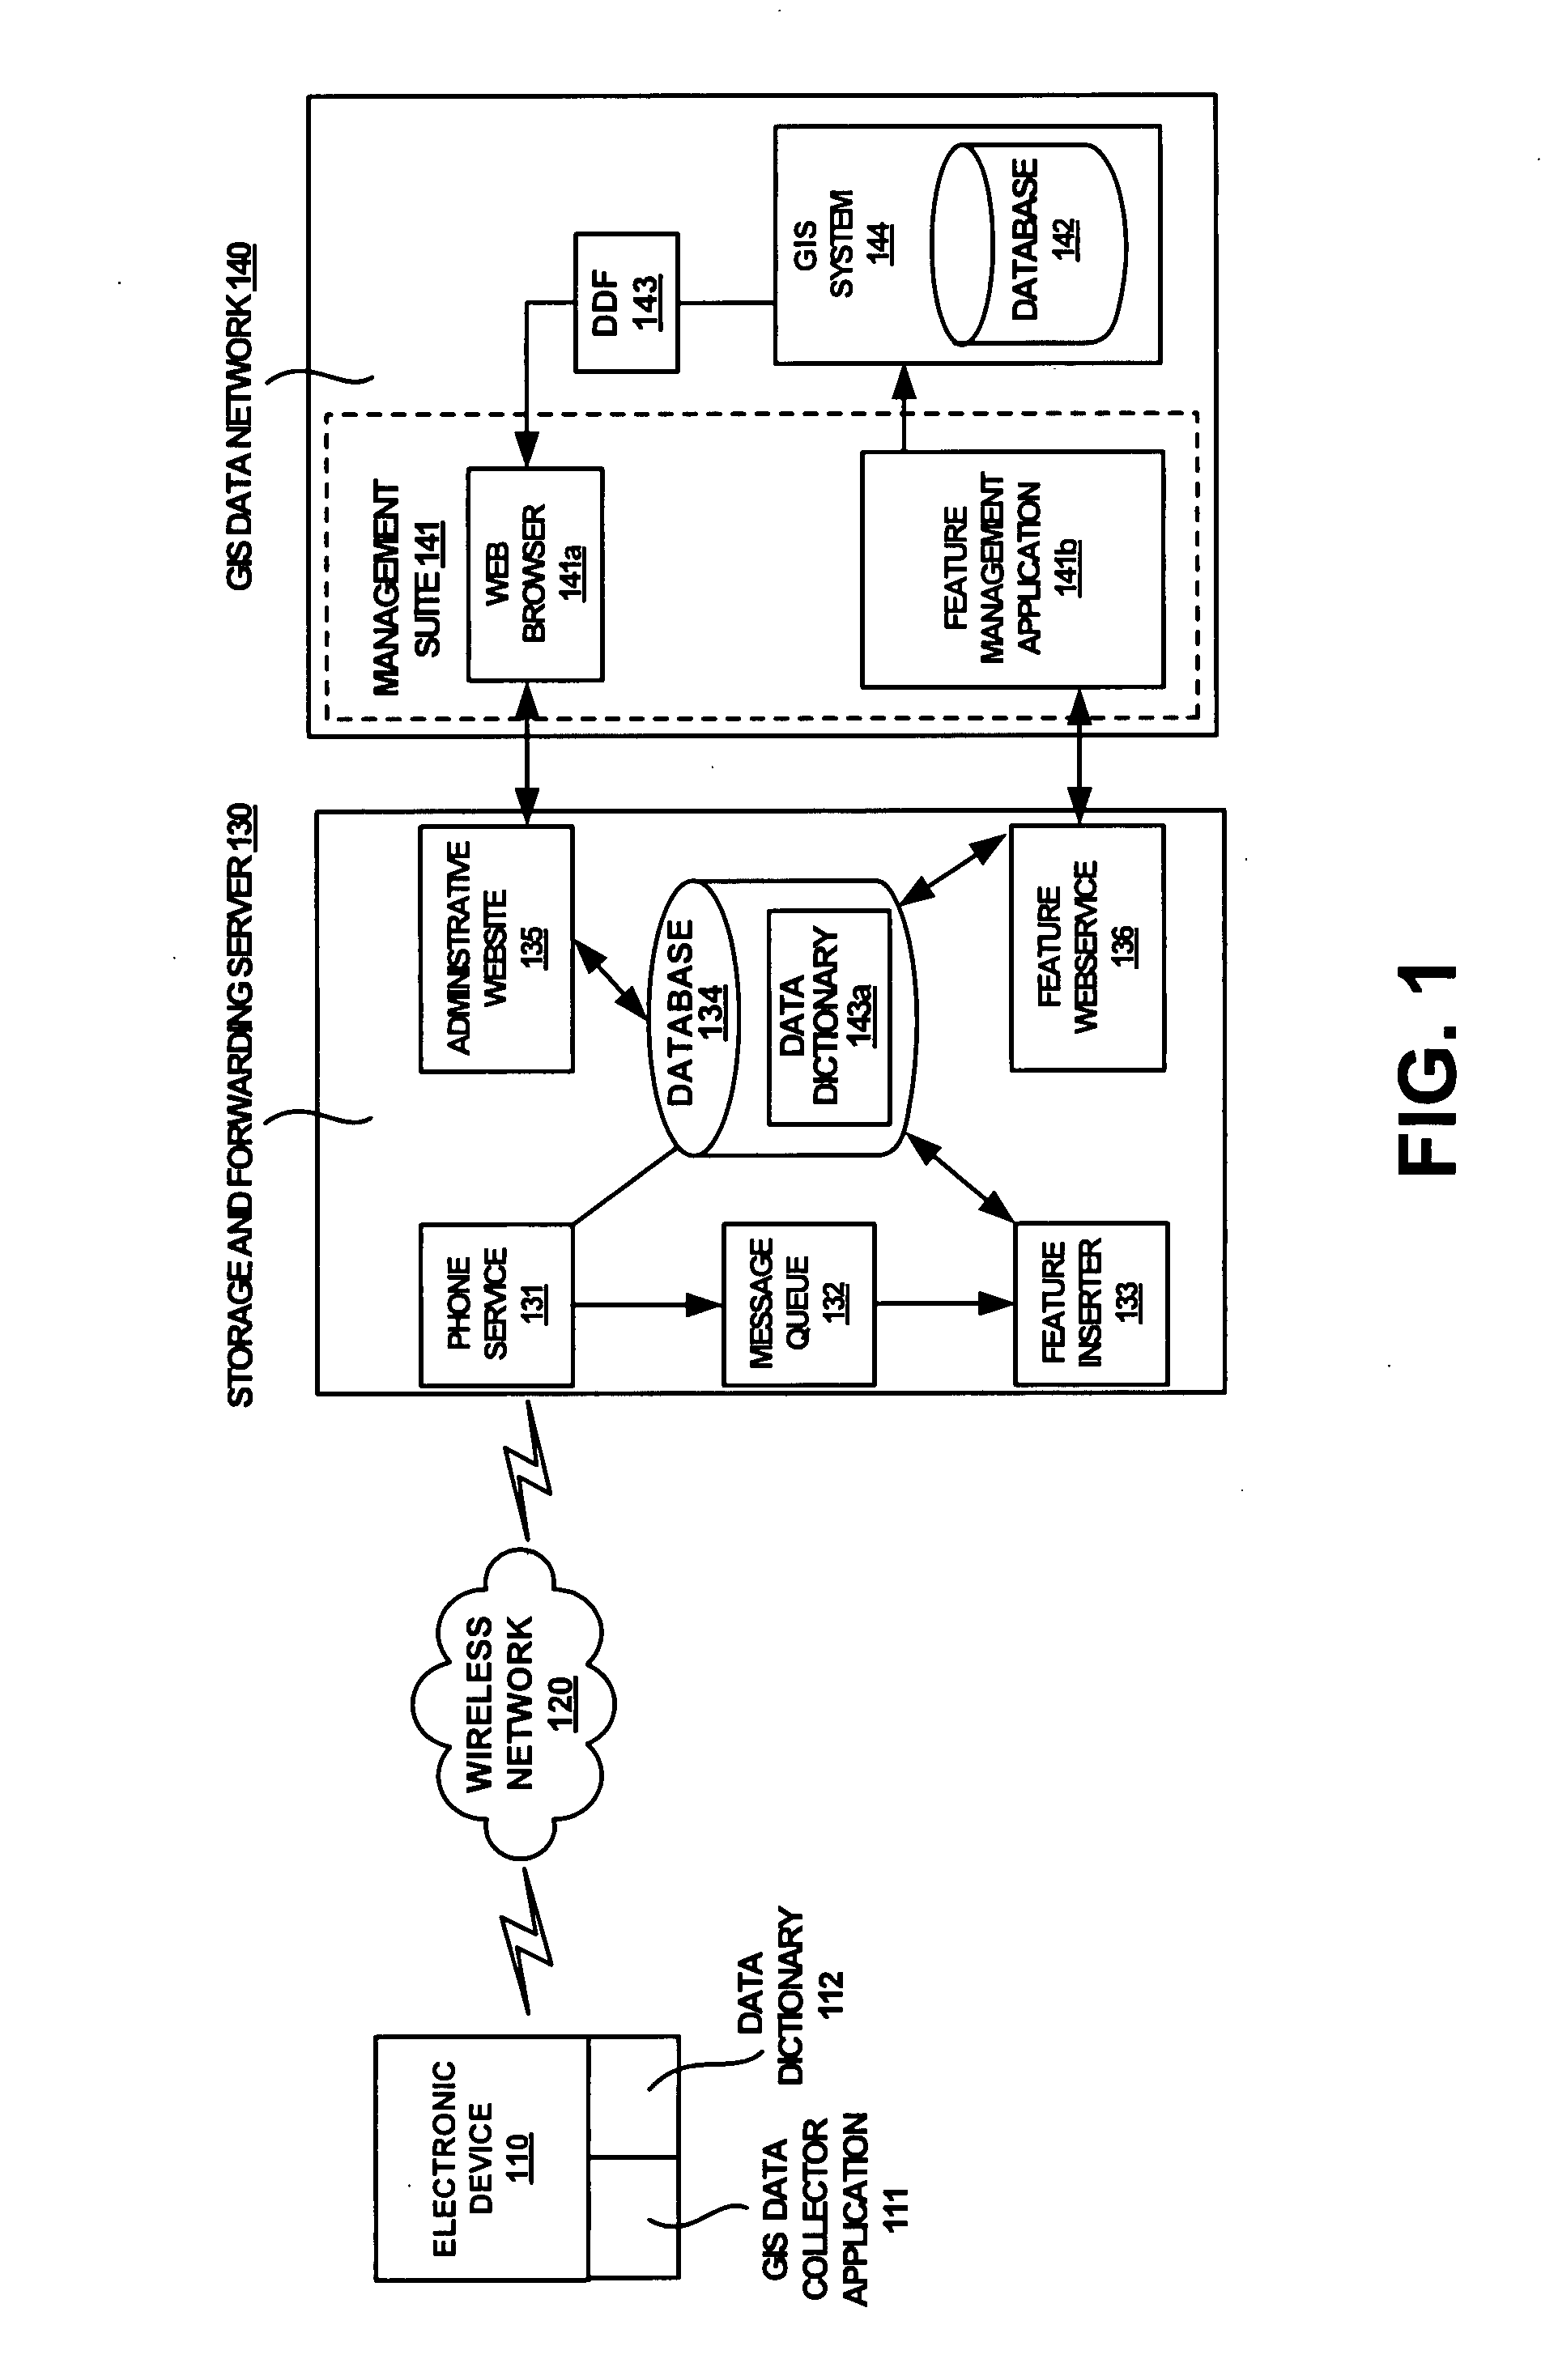 Method and system for administrating GIS data dictionaries